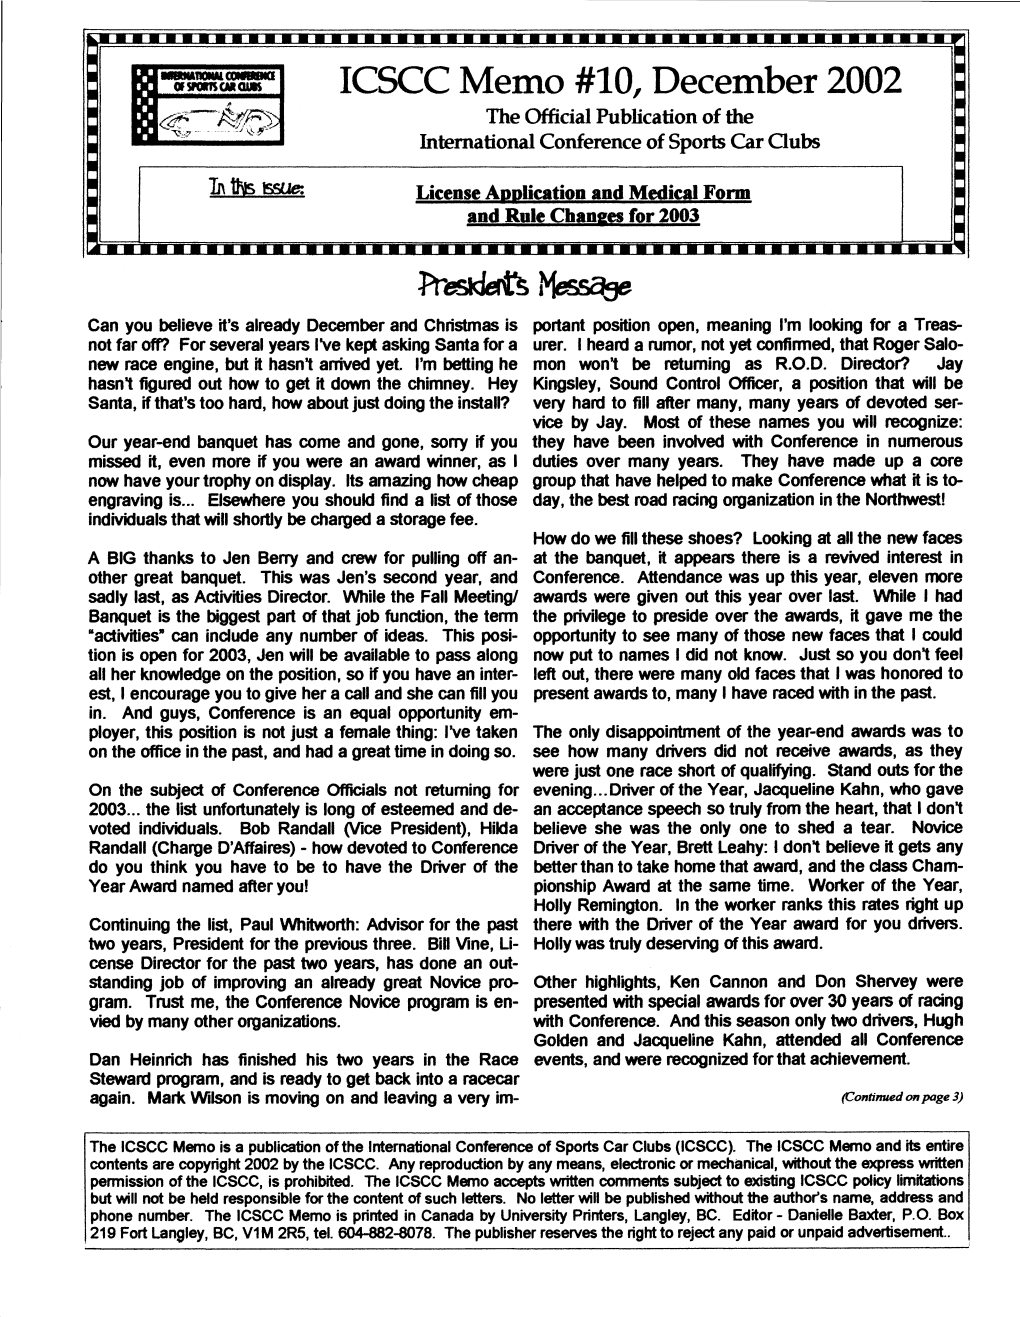 ICSCC Memo #10, December 2002 the Official Publication of the International Conference of Sports Car Oubs